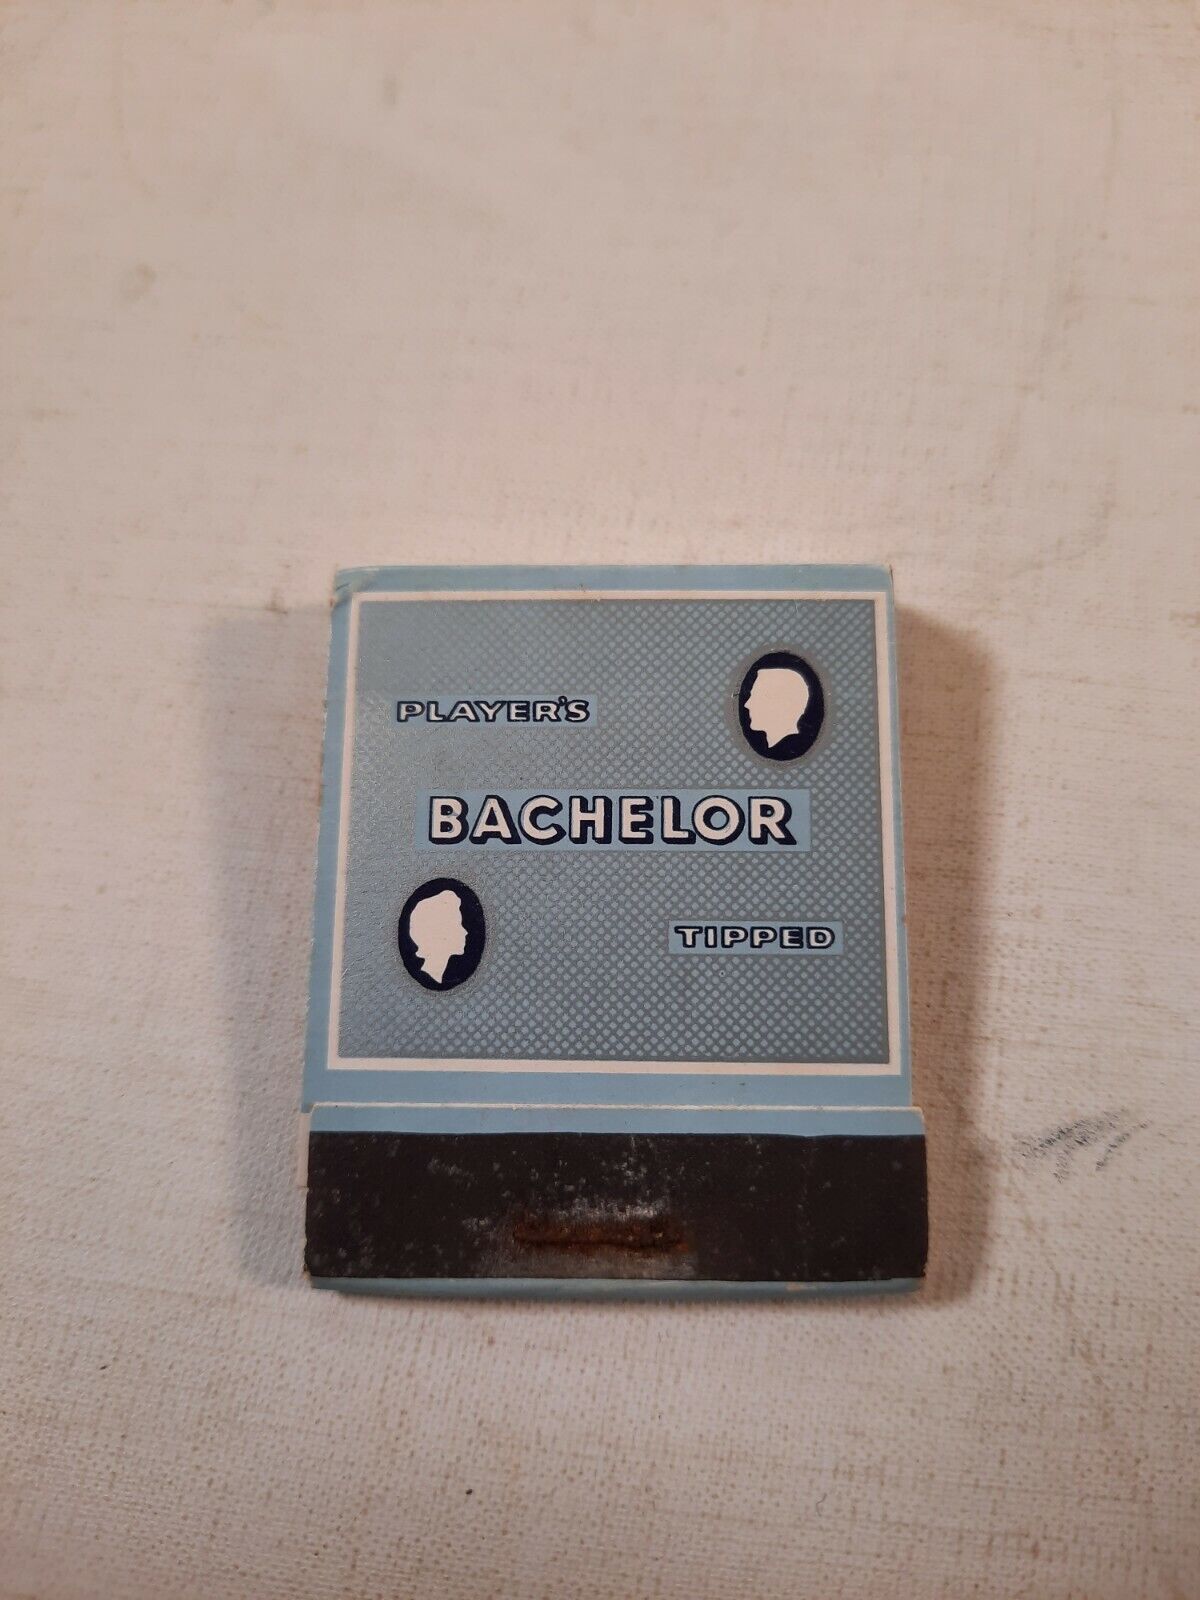 Vtg players bachelor tipped matchbook full .feature matches 